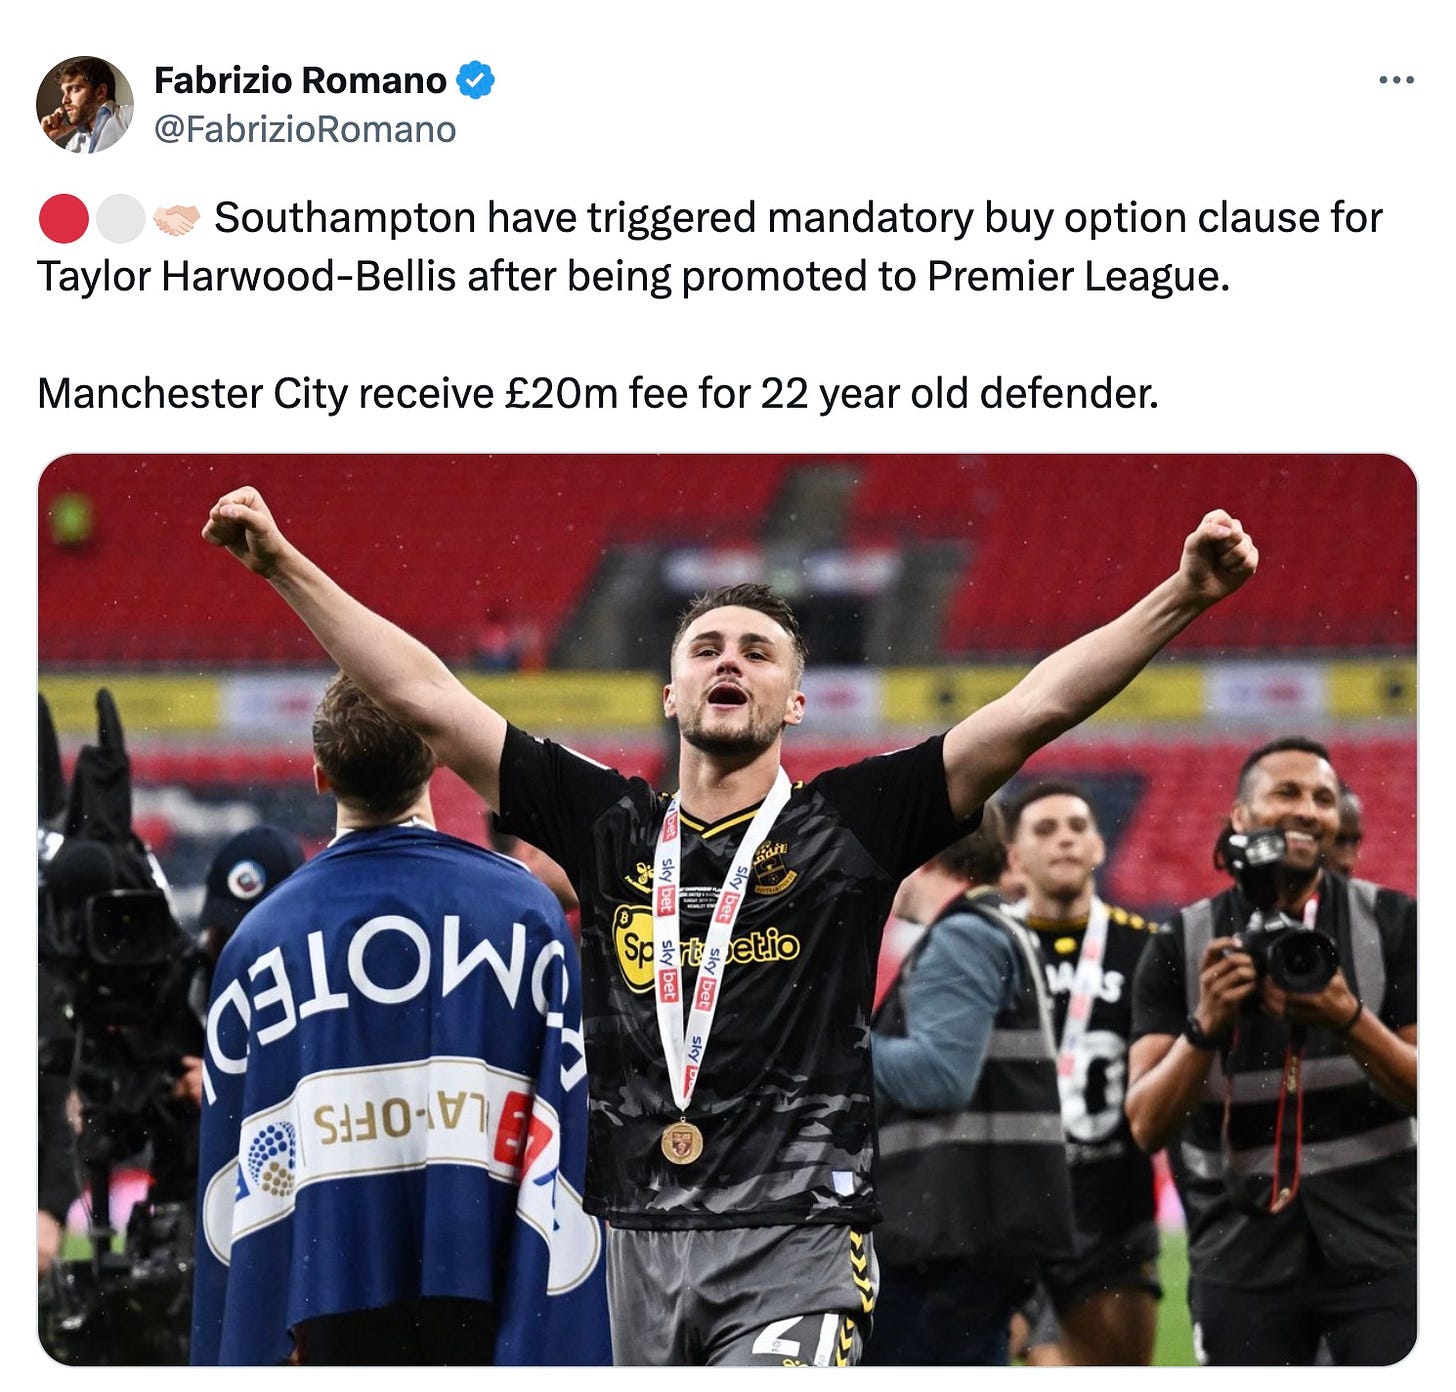 A tweet by Fabrizio Romano about Taylor Harwood-Bellis signing for Southampton from Man City